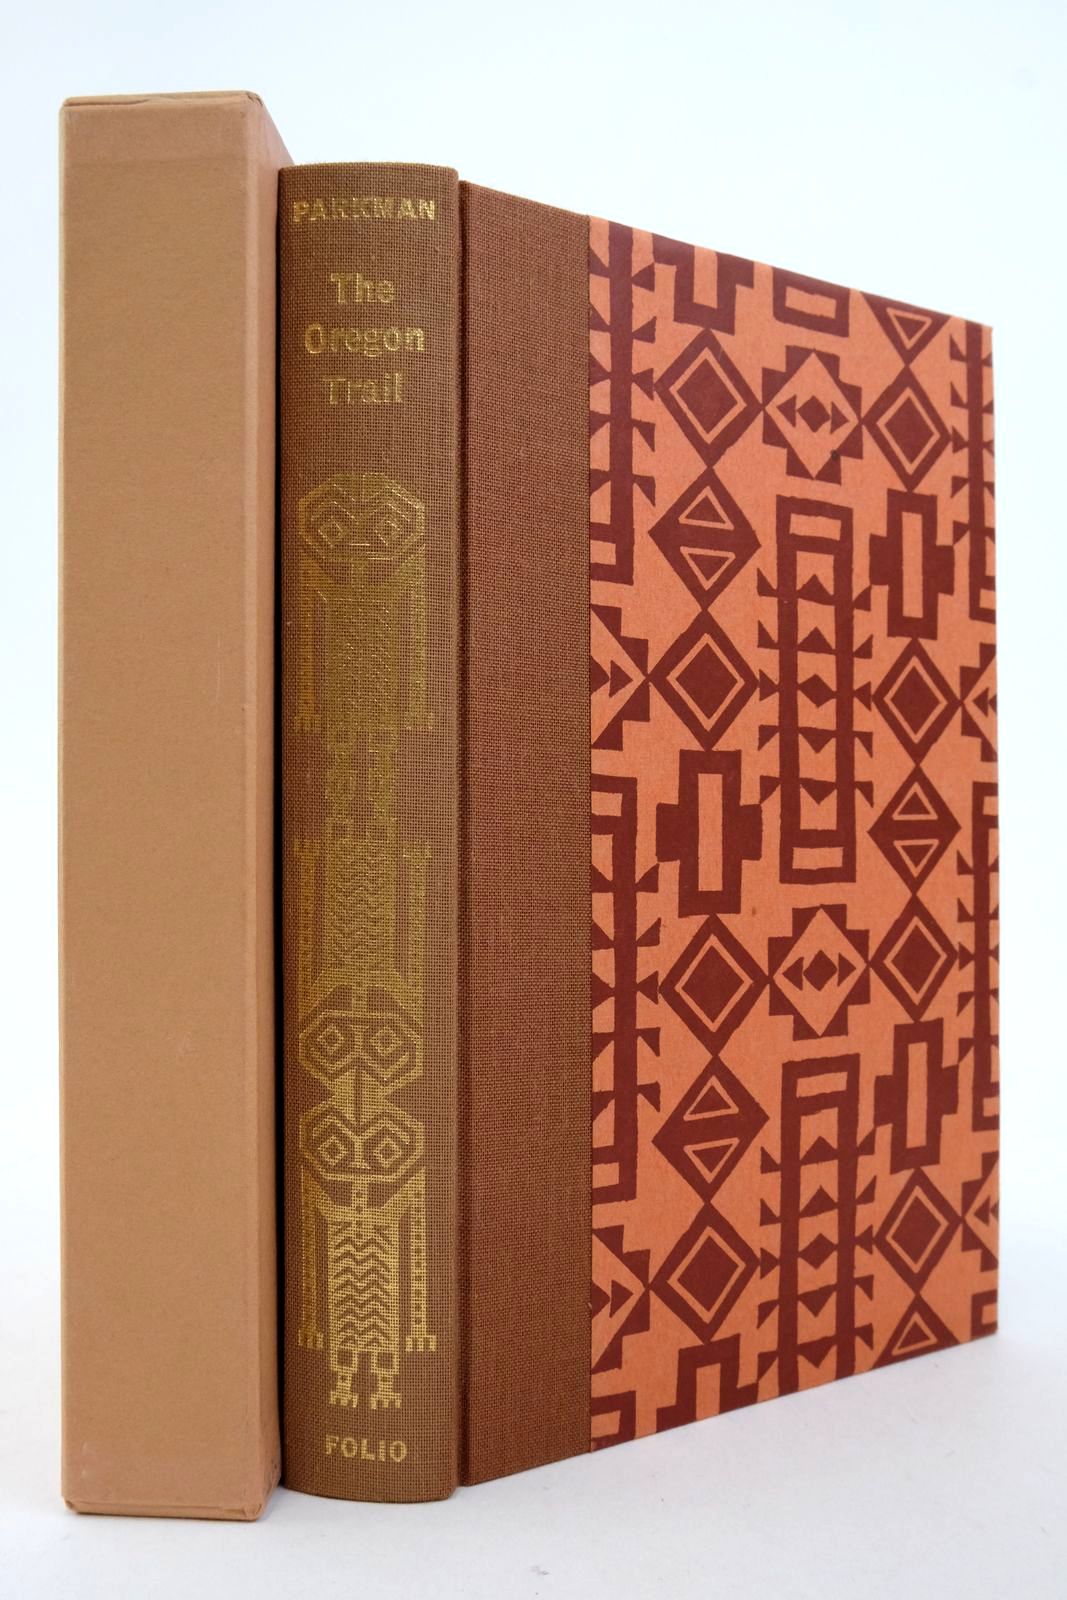 Photo of THE OREGON TRAIL: SKETCHES OF PRAIRIE AND ROCKY MOUNTAIN LIFE written by Parkman, Francis Ridge, Martin illustrated by Pendrey, Peter published by Folio Society (STOCK CODE: 2138346)  for sale by Stella & Rose's Books